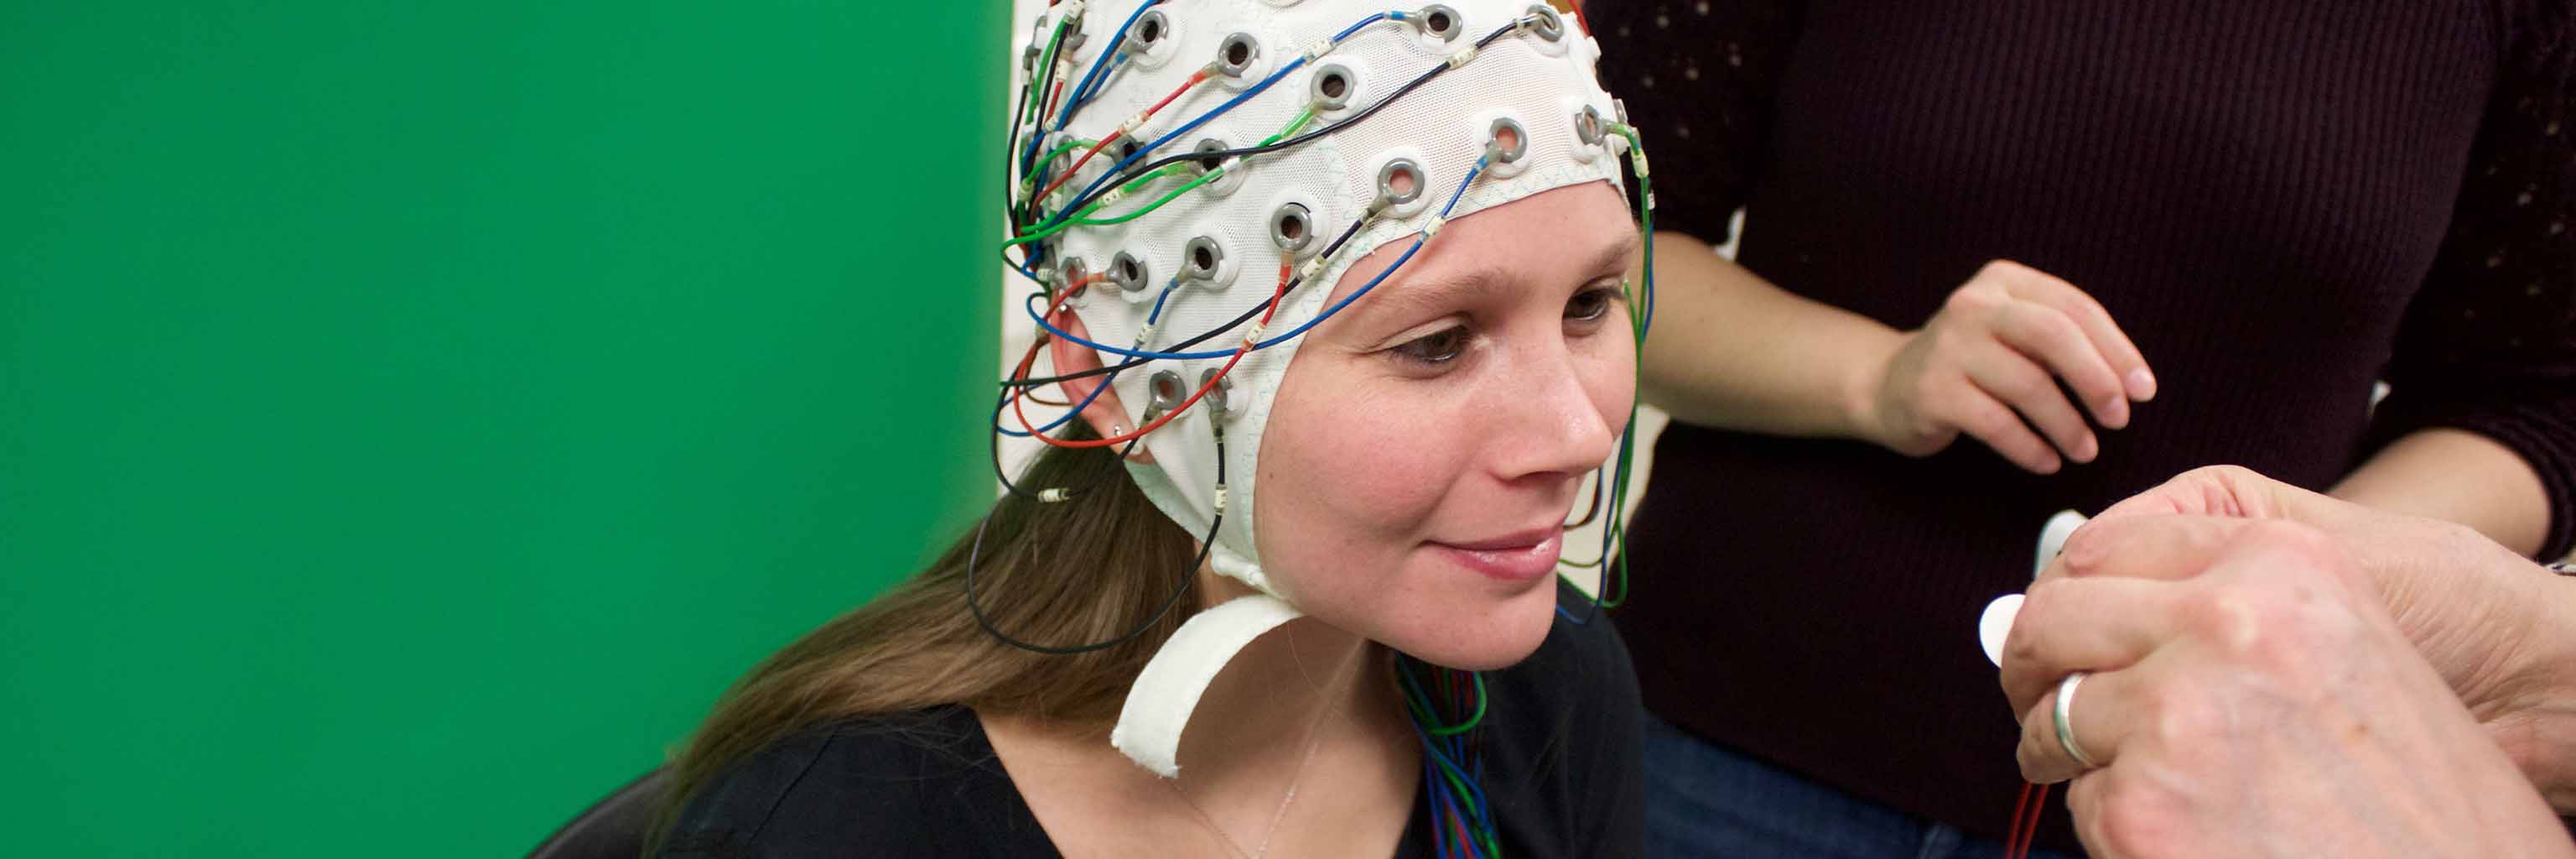 woman with a special cap with wires that analyzes her brain